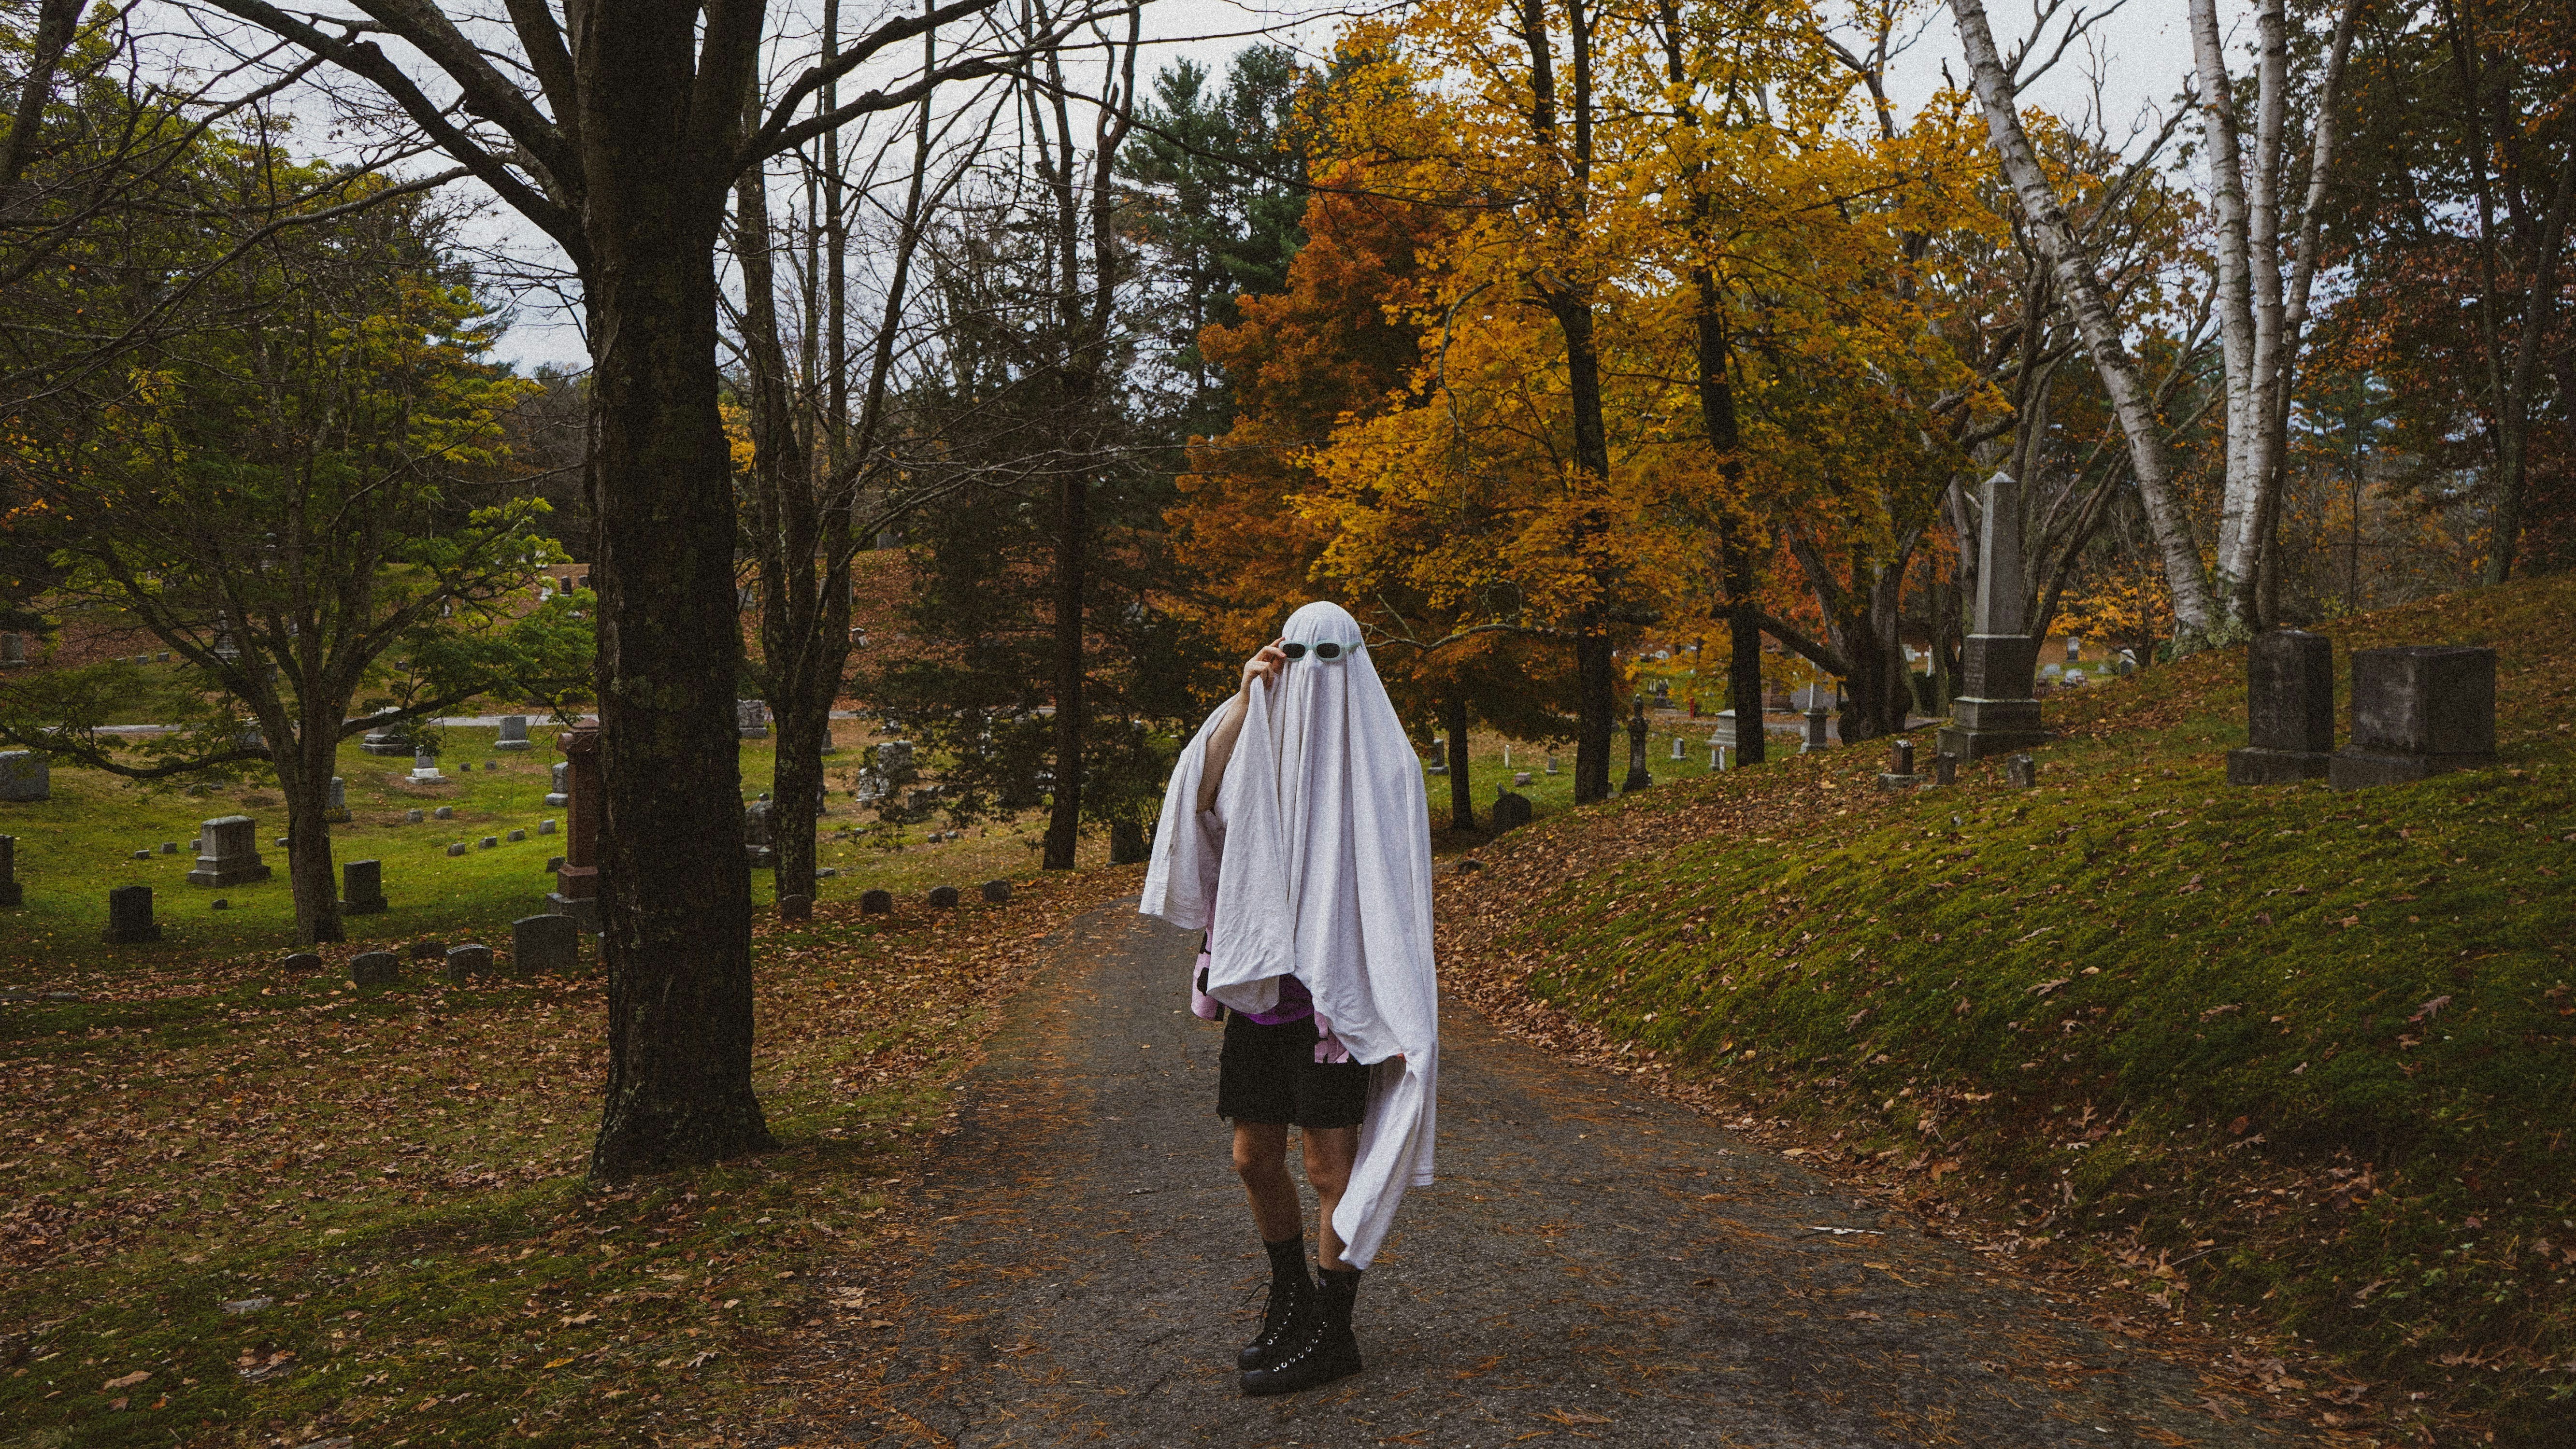 ghost in sunglasses standing on graveyard road on halloween, oct 2021